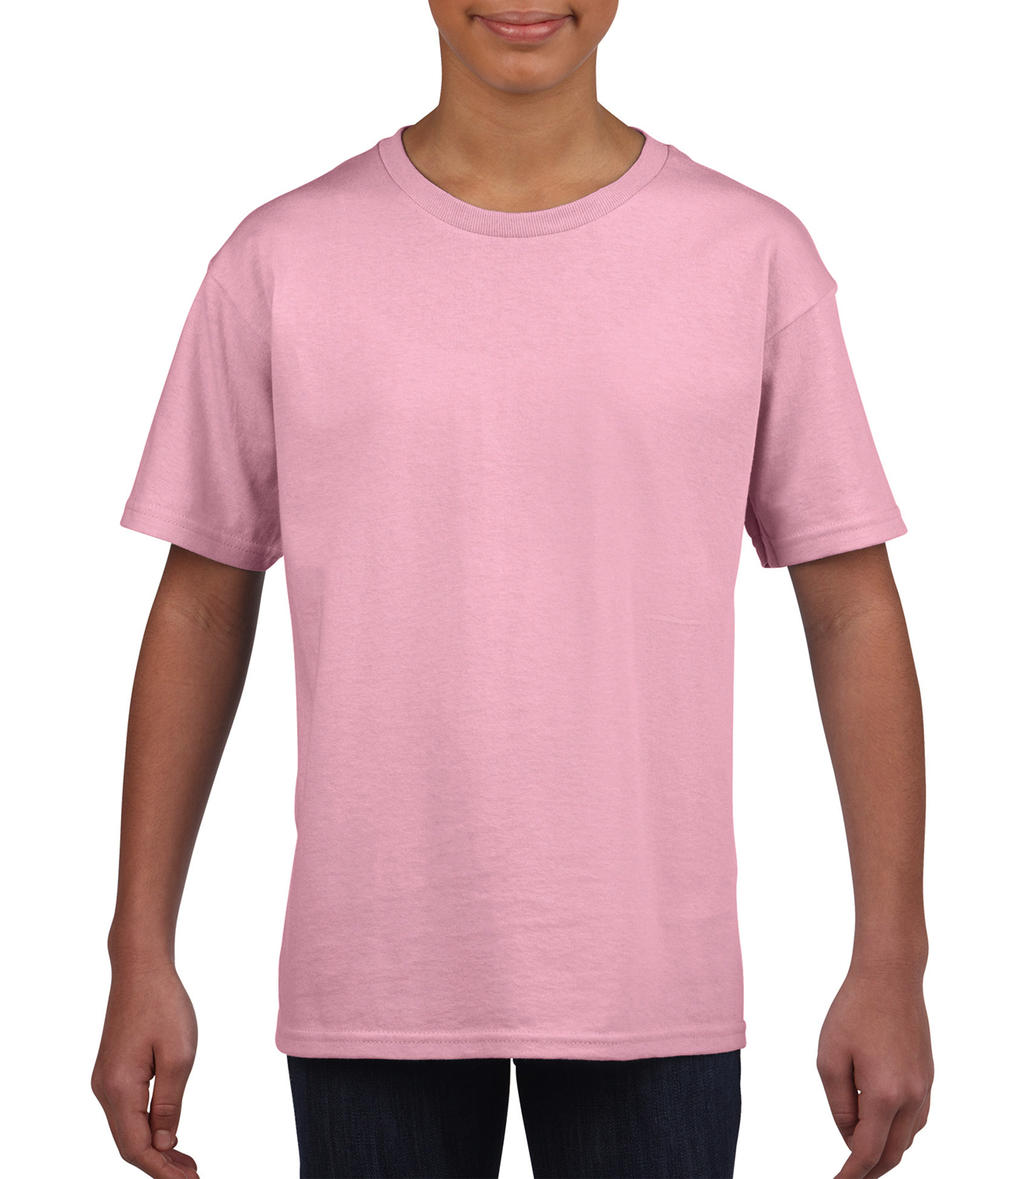  Softstyle? Youth T-Shirt in Farbe Light Pink